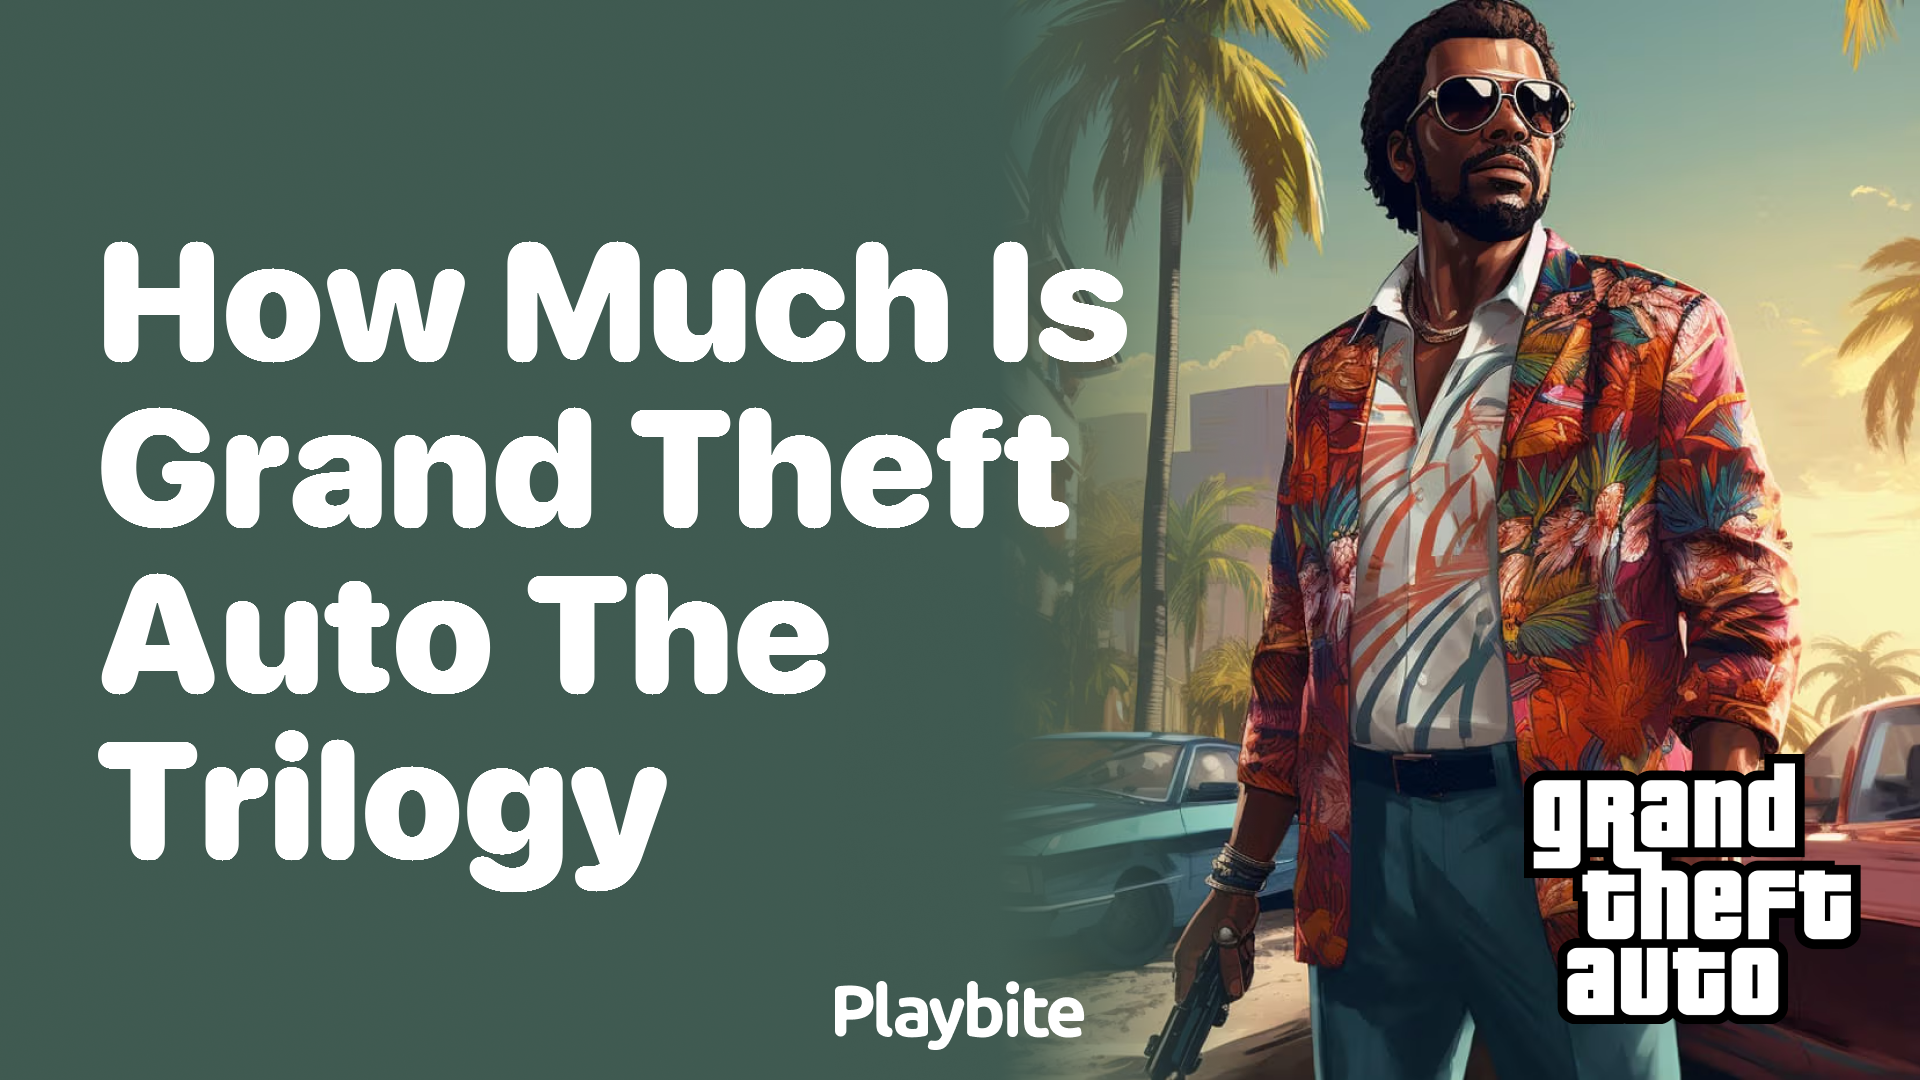 How much does Grand Theft Auto: The Trilogy cost?